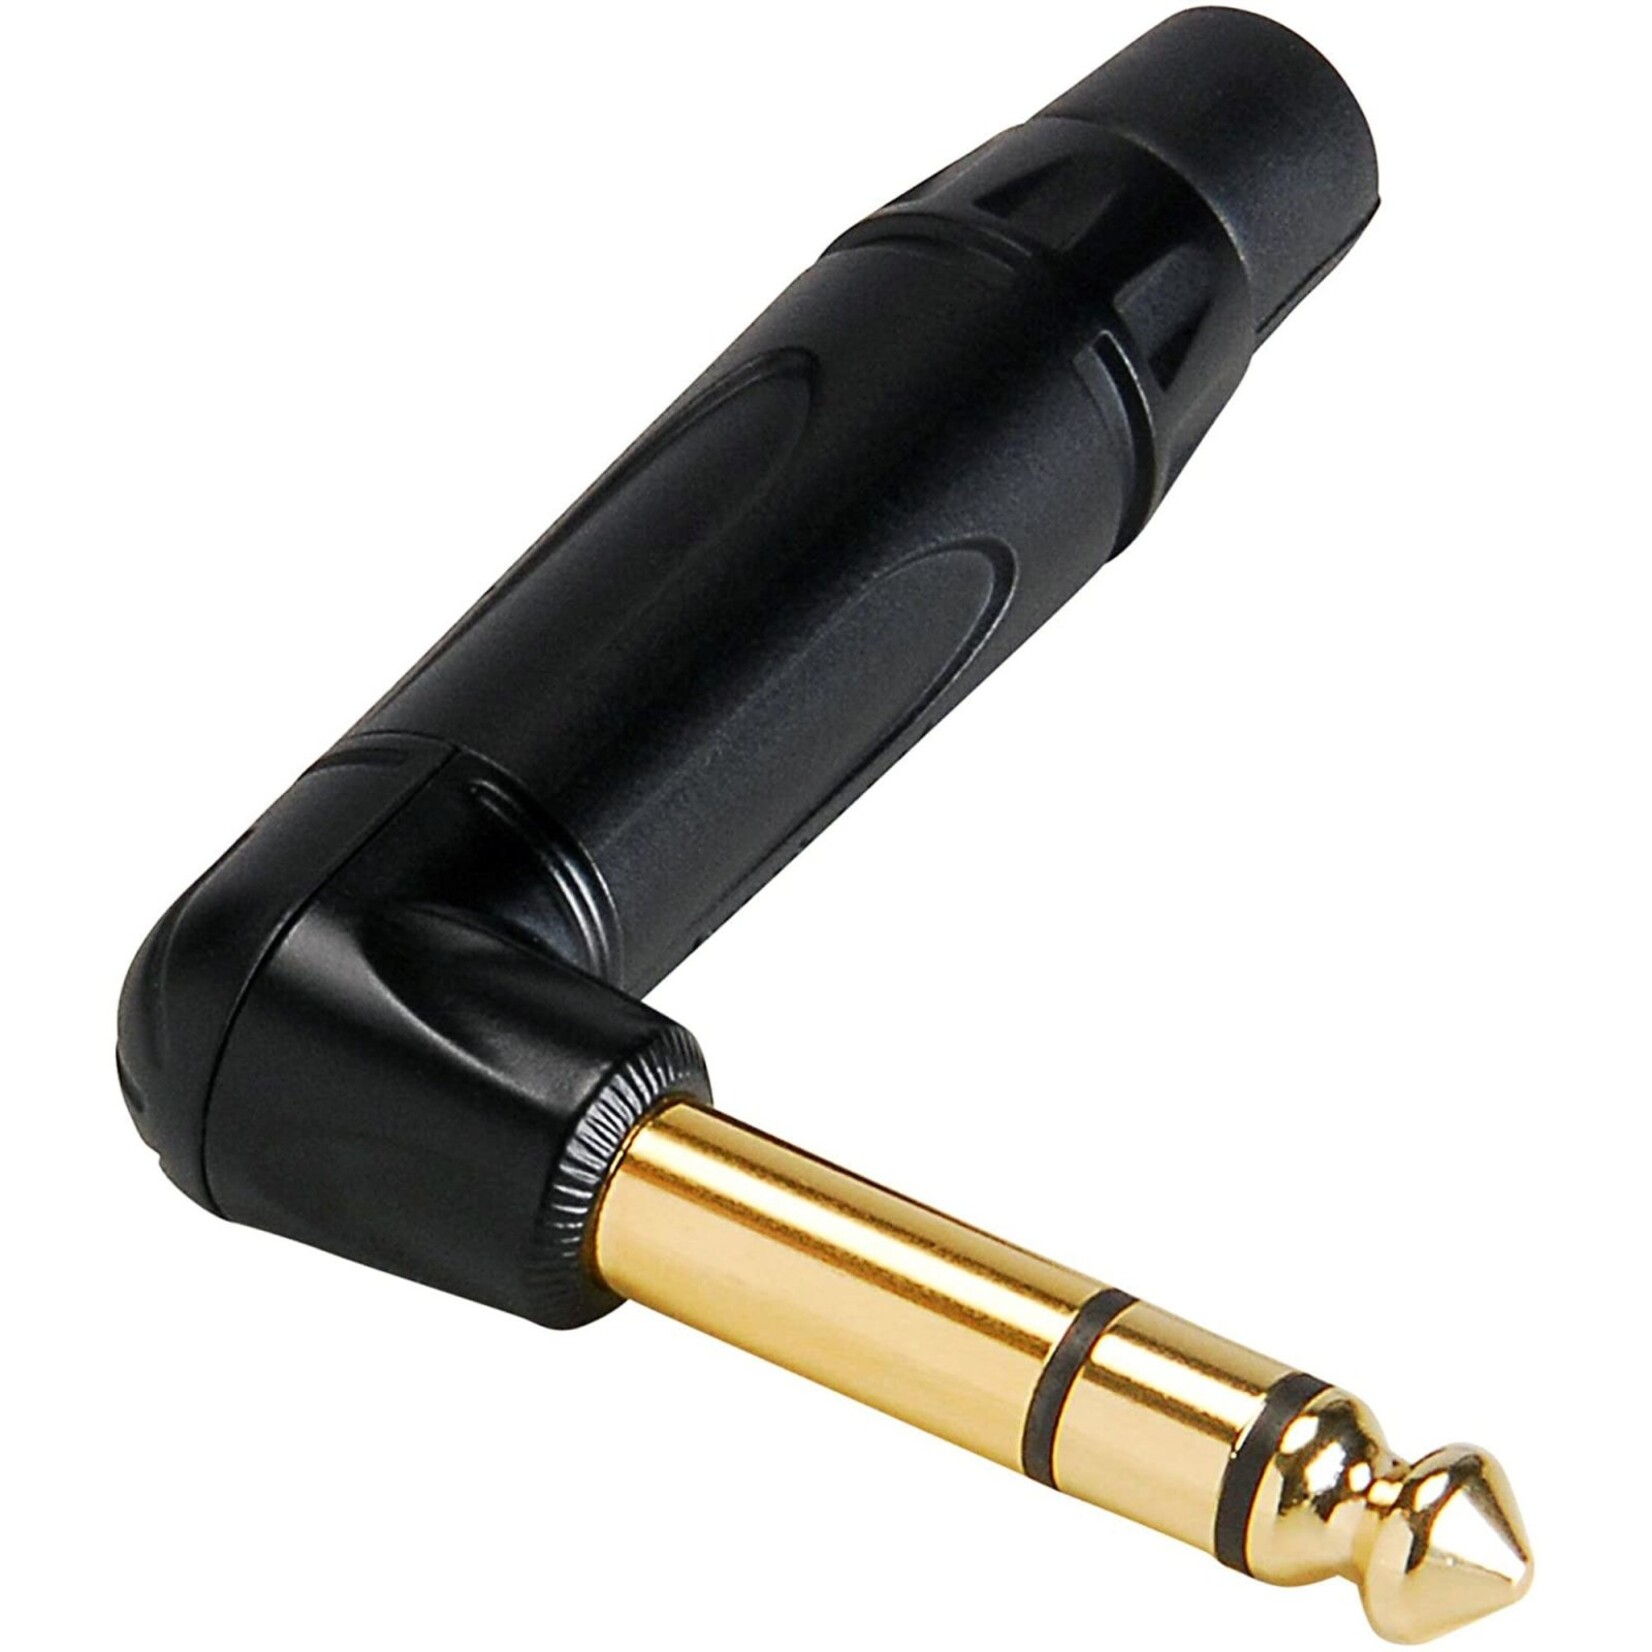 Amphenol ACPS-TB-AU 1/4" TRS Right Angle Phone Plug Connector Black with Gold Contacts